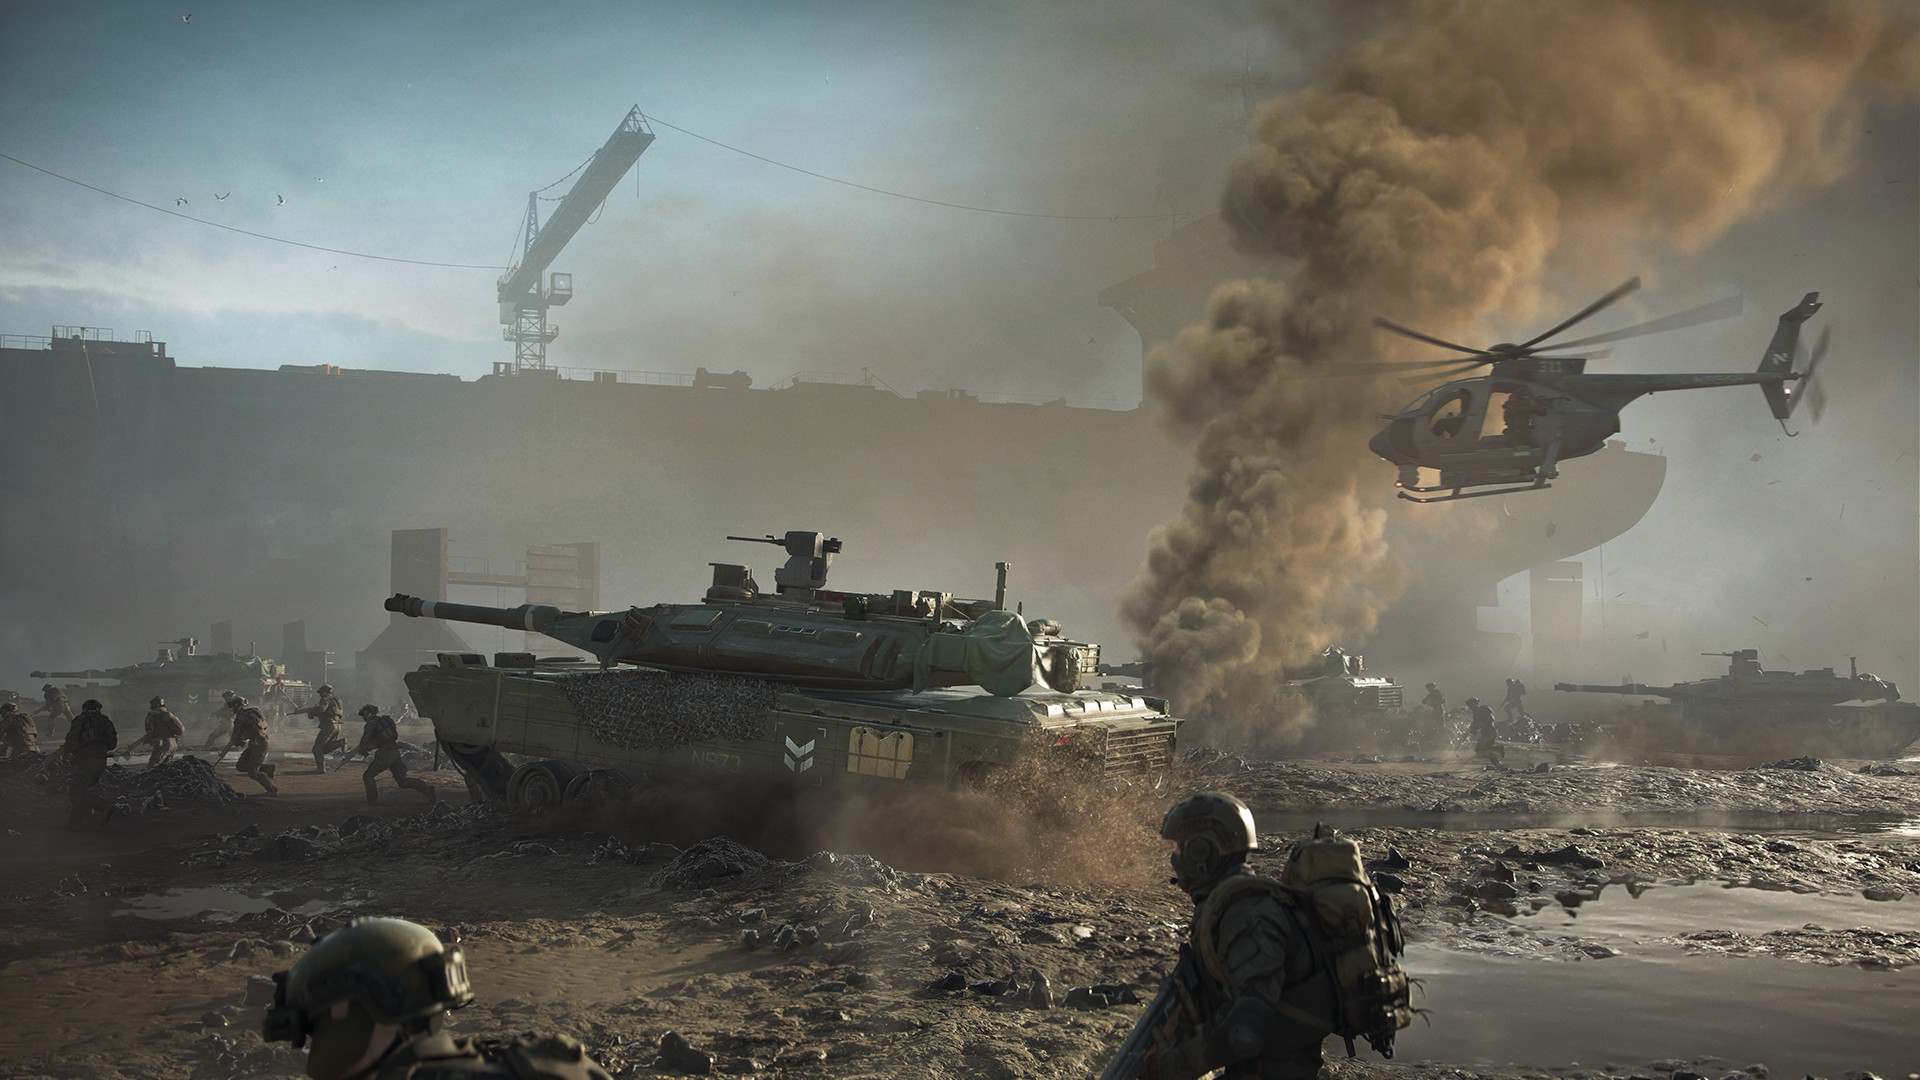 BF2042 vehicles: A tank trundles through the battlefield in Battlefield 2042.